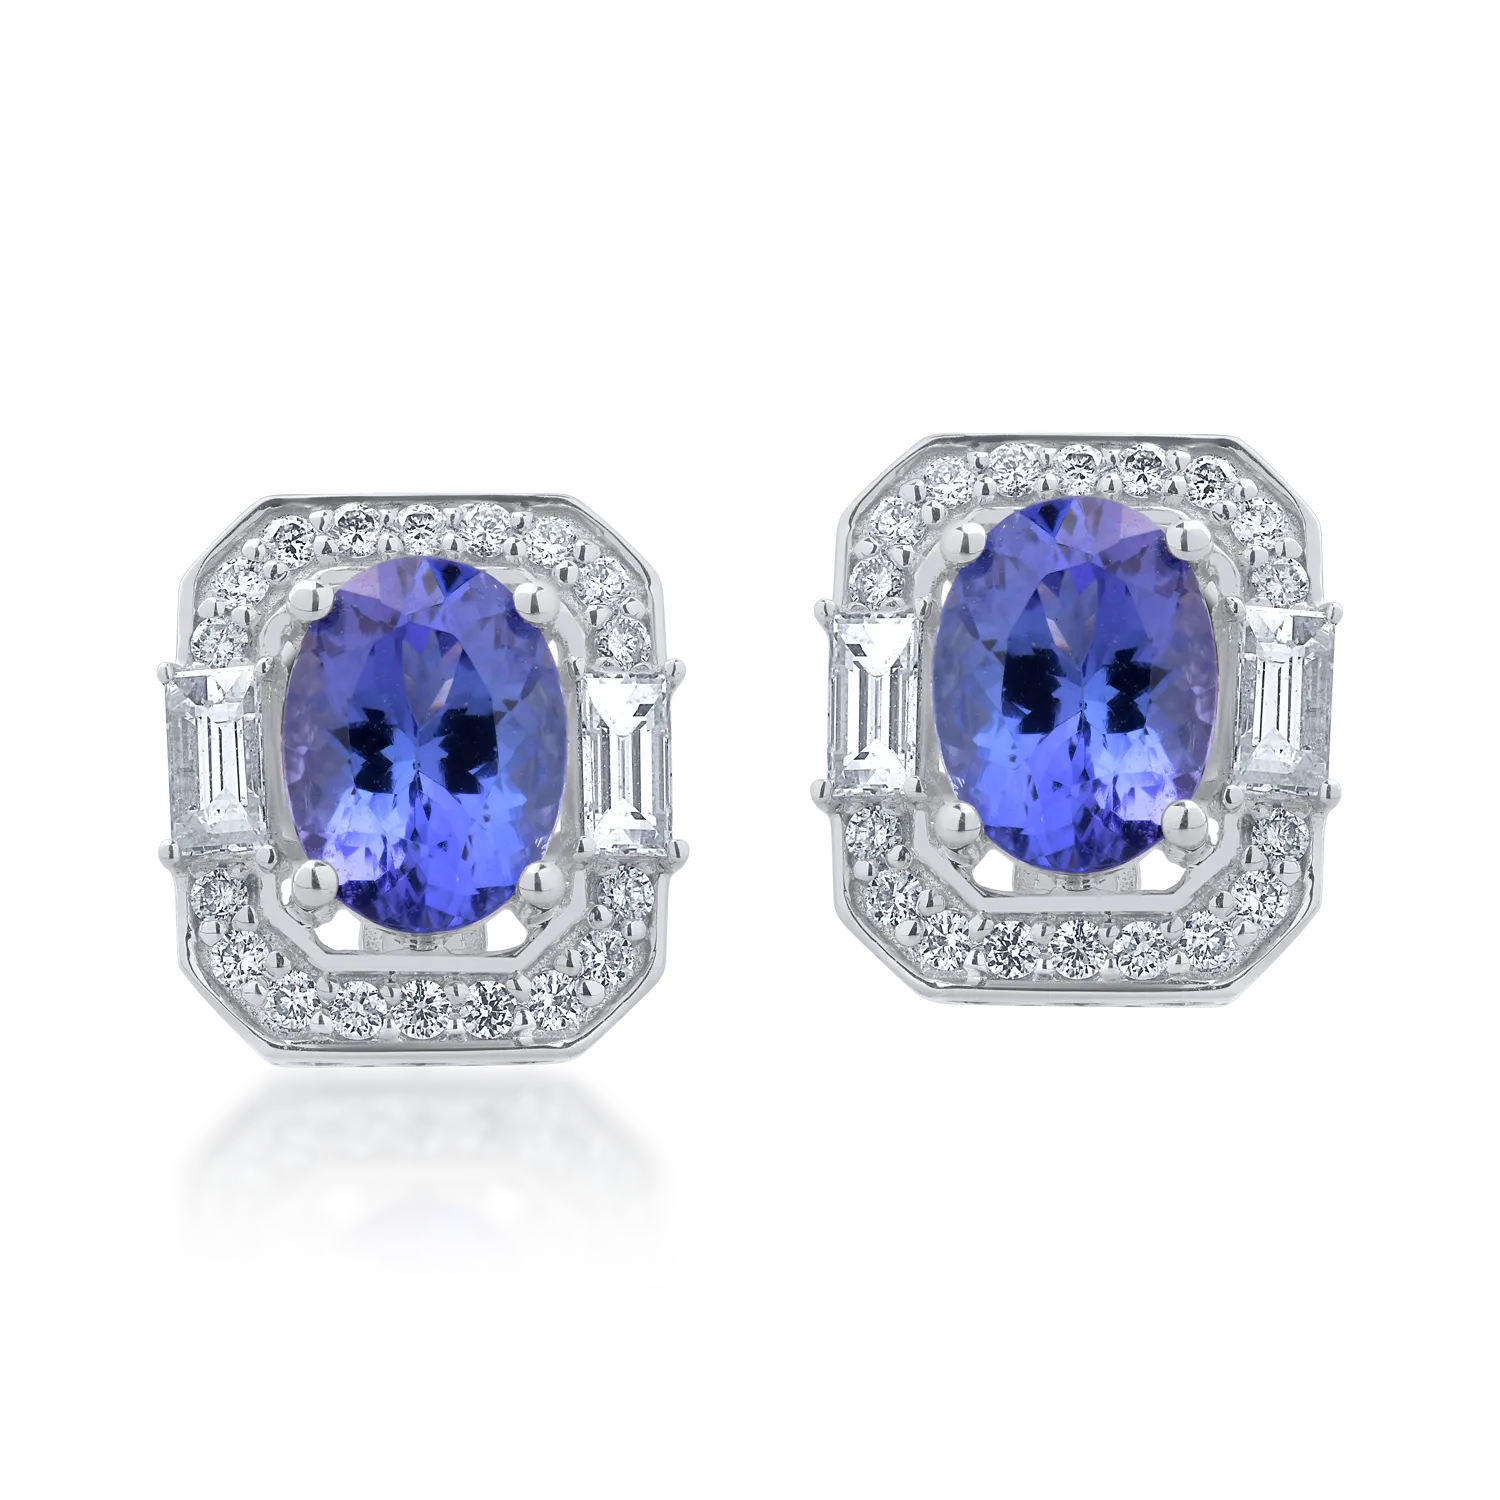 18K white gold earrings with 2.74ct tanzanites and 0.731ct diamonds